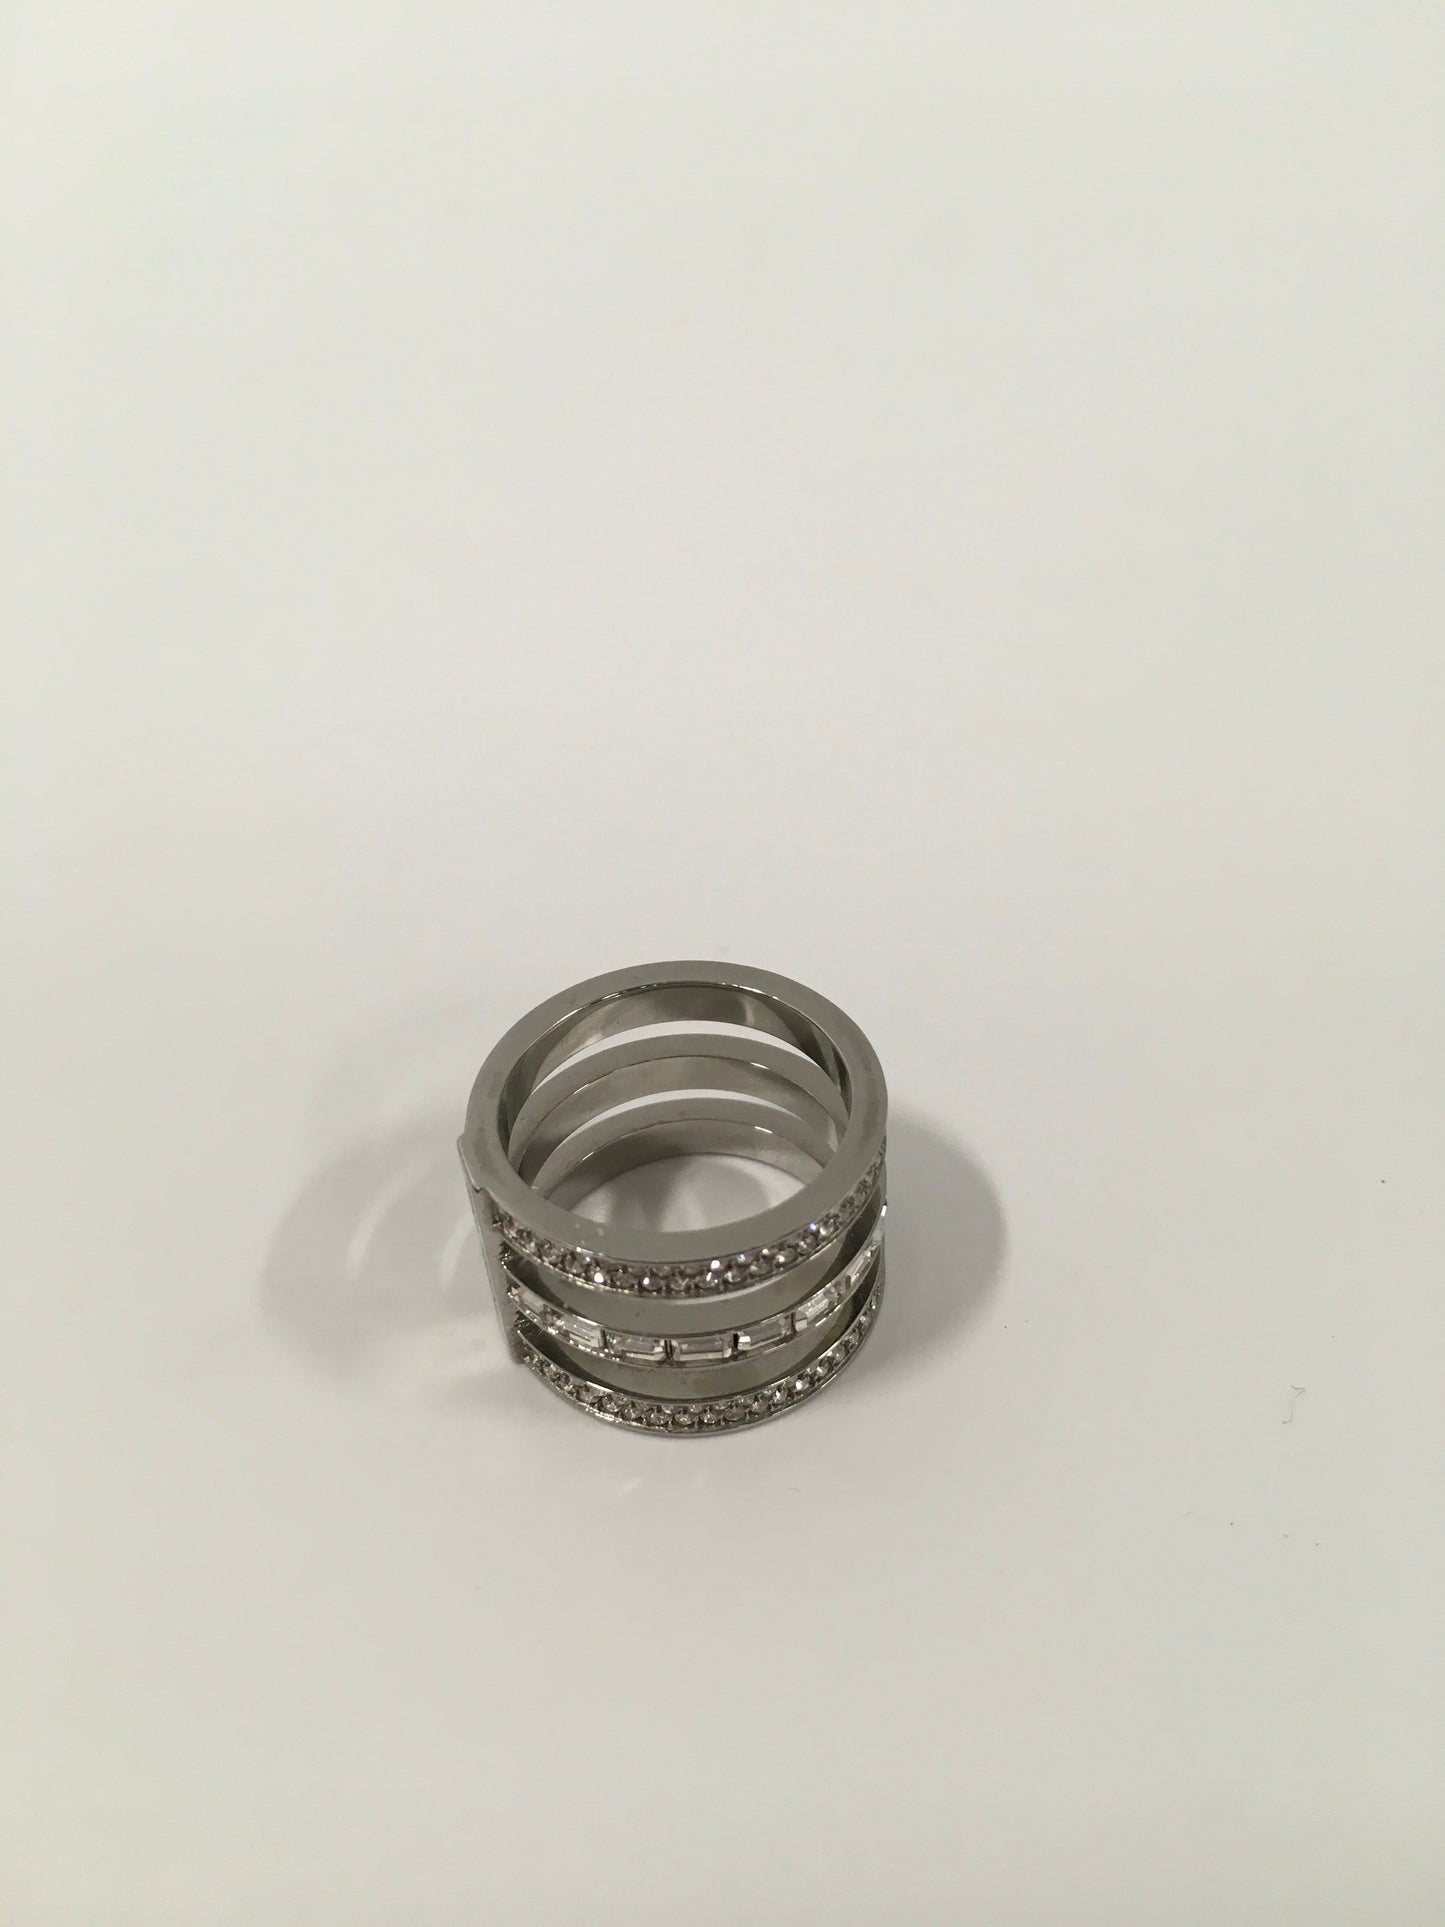 Ring Band By Michael Kors